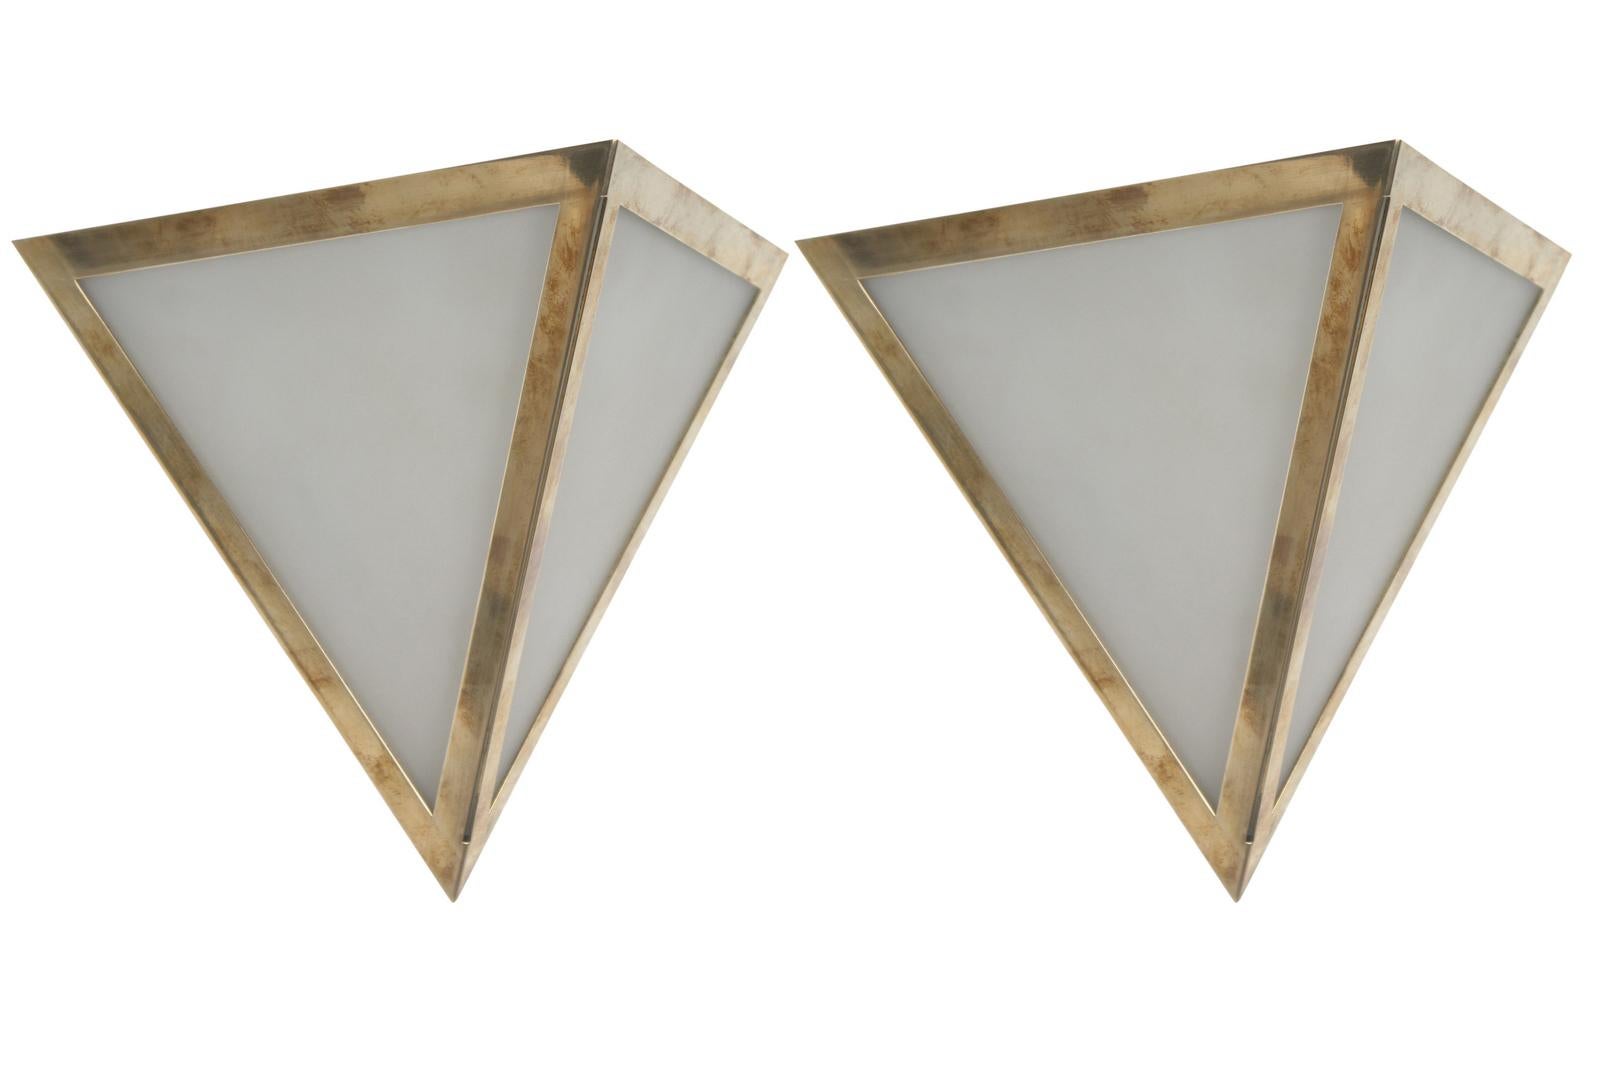 Industrial Pair of Triangular Opaque Glass Wall Sconces from a 1970s Cruise Ship Stateroom